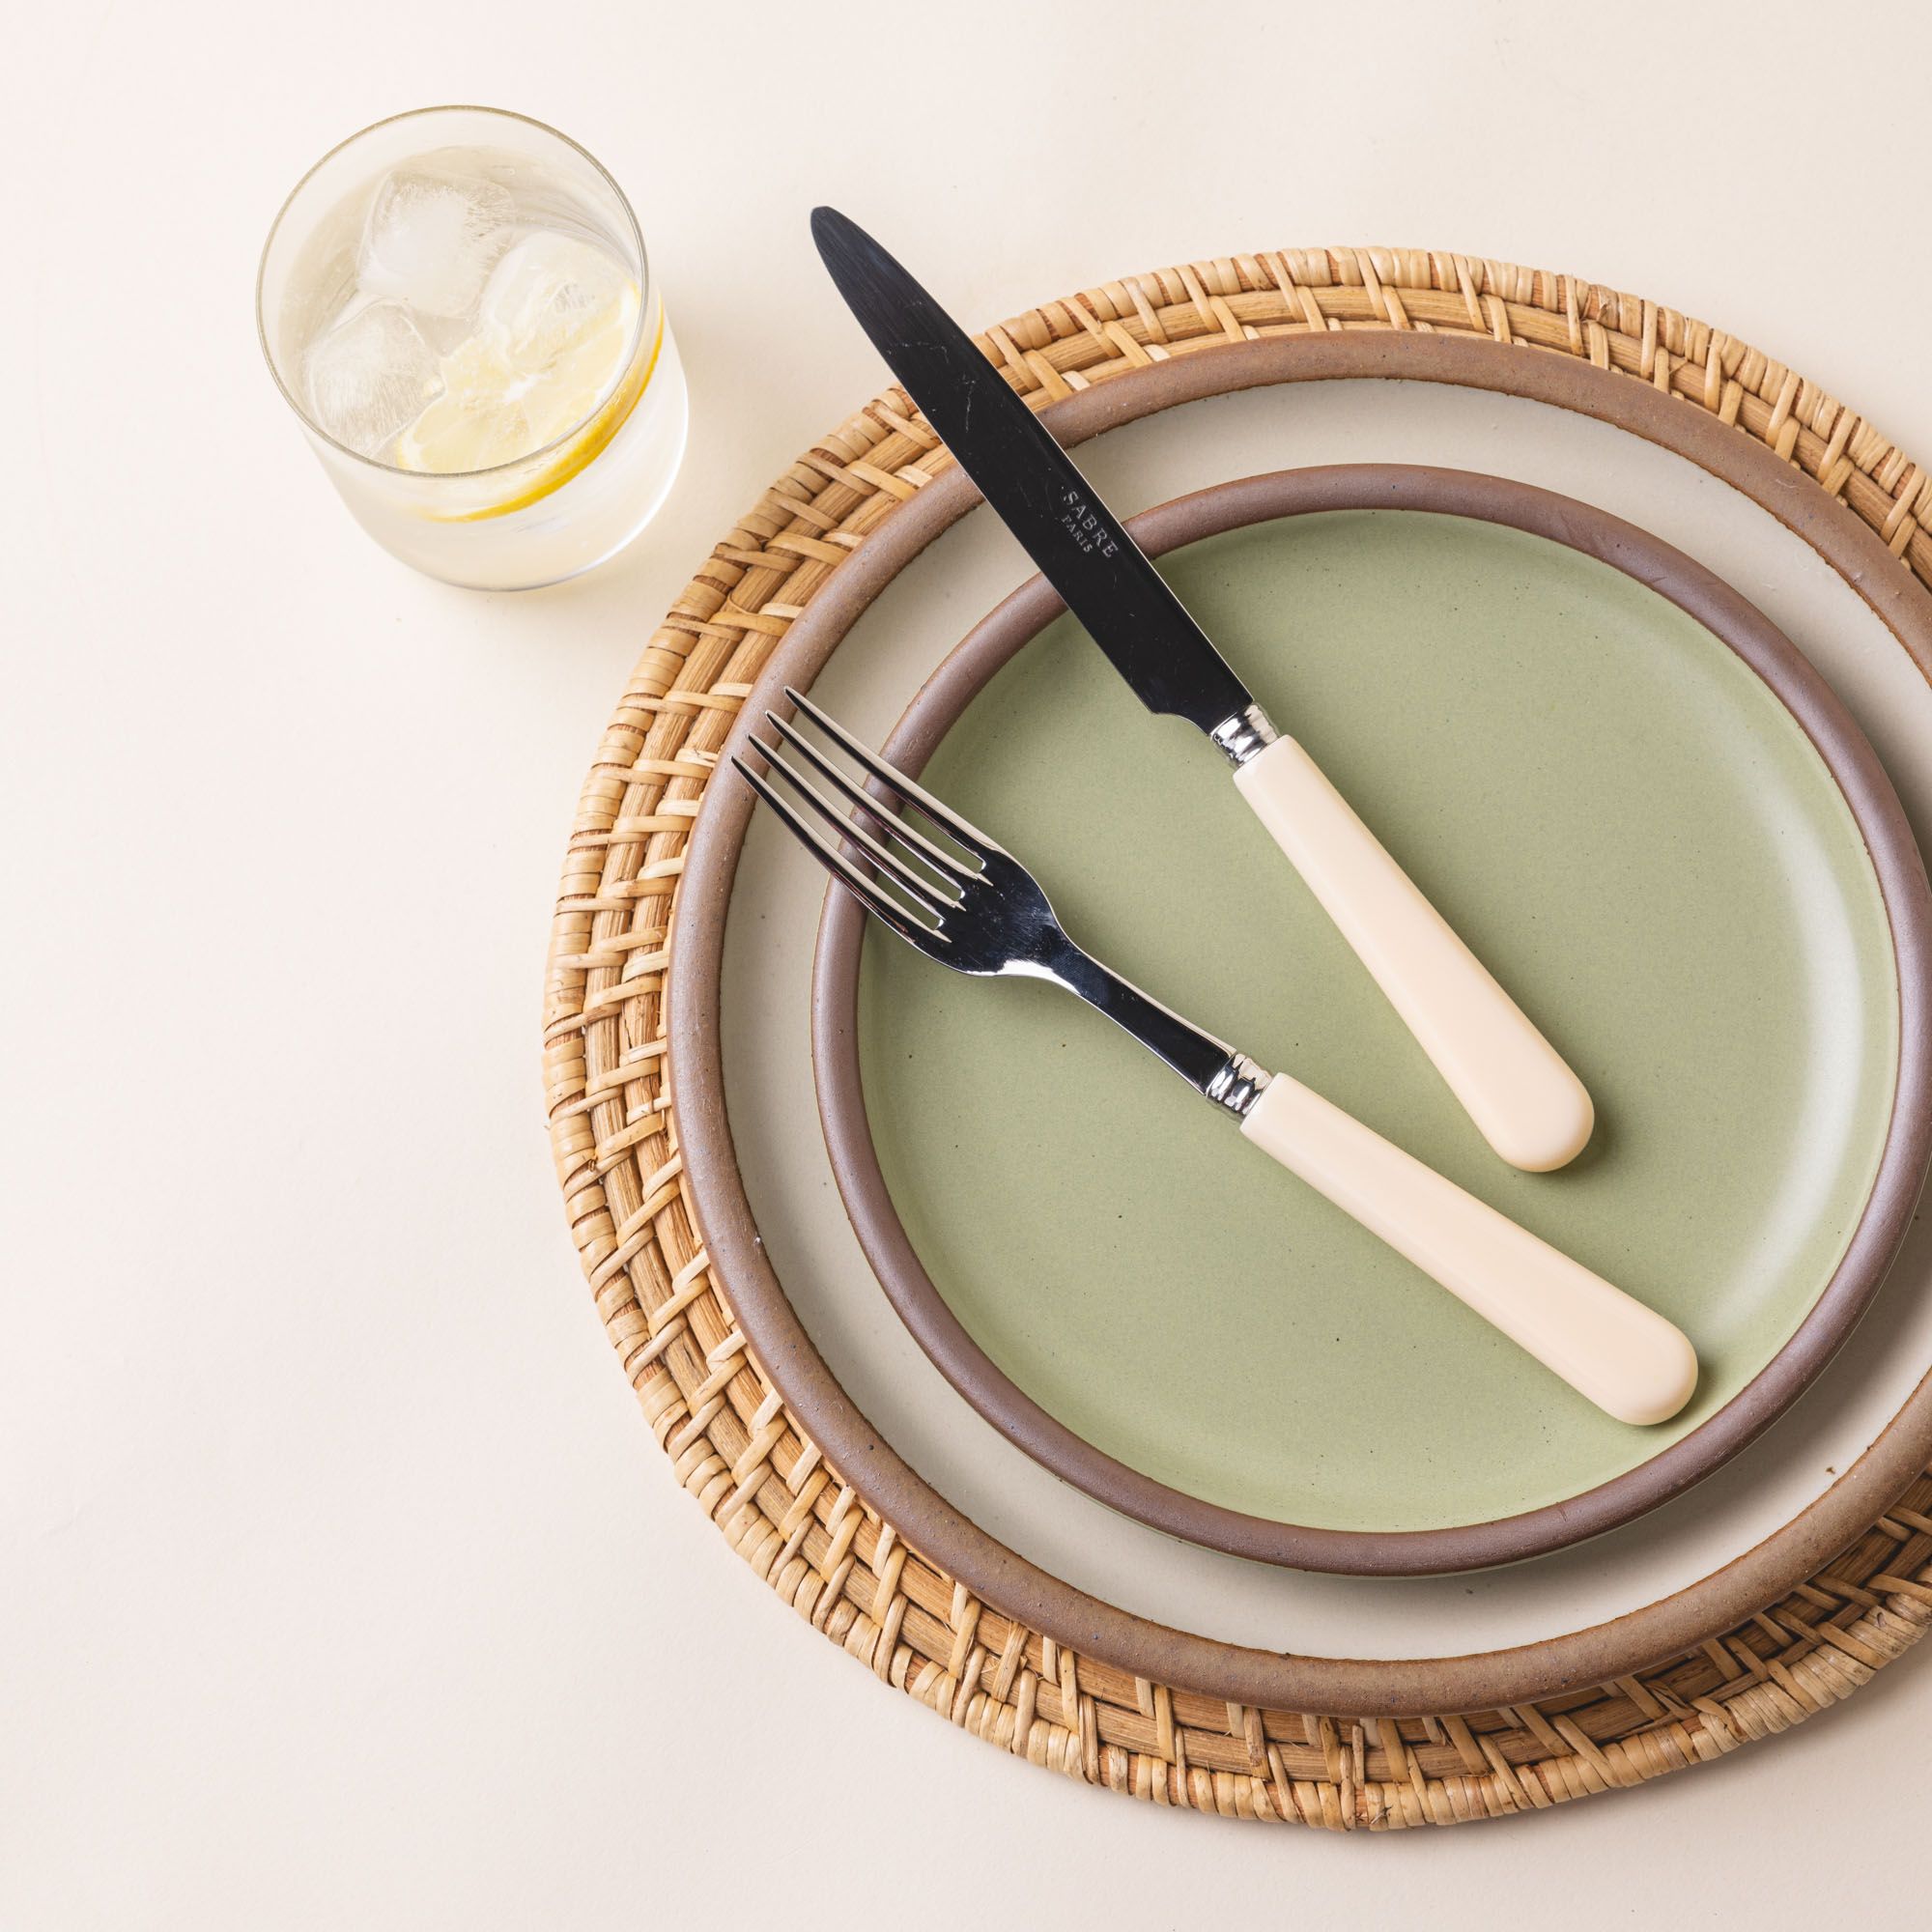 A place setting with 2 ceramics plates, 1 sage green, and 1 neutral, sitting on a woven natural charger. A cream matte handled fork and knife are arranged on top of the plates.